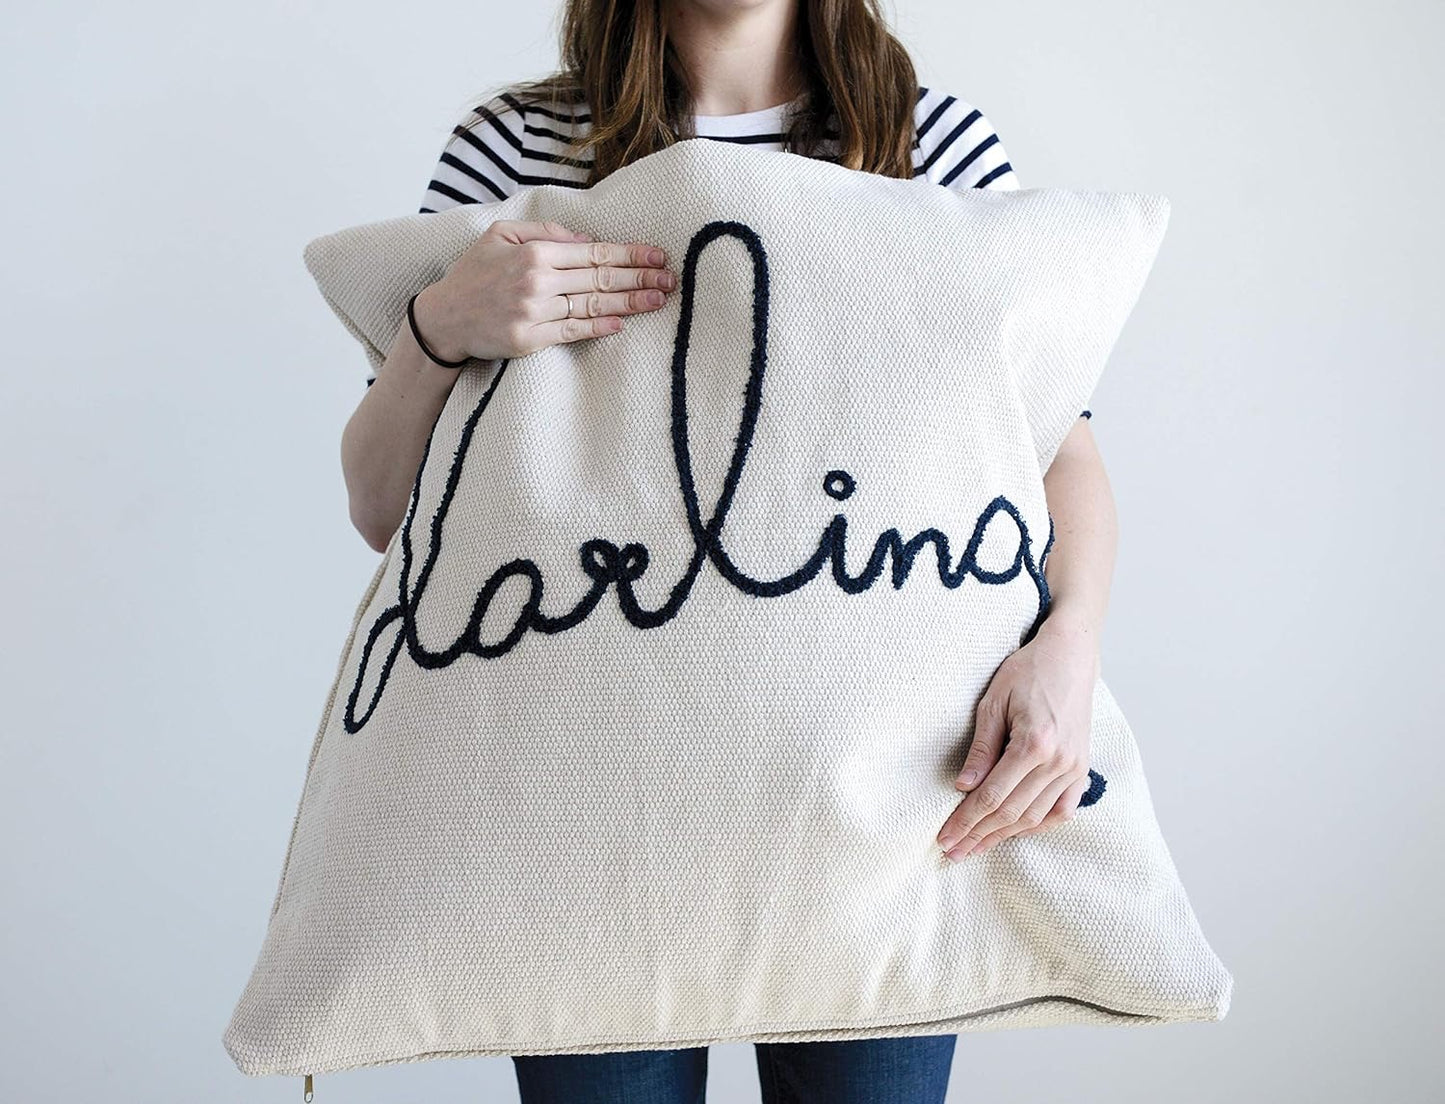 Darling Oversized Pillow